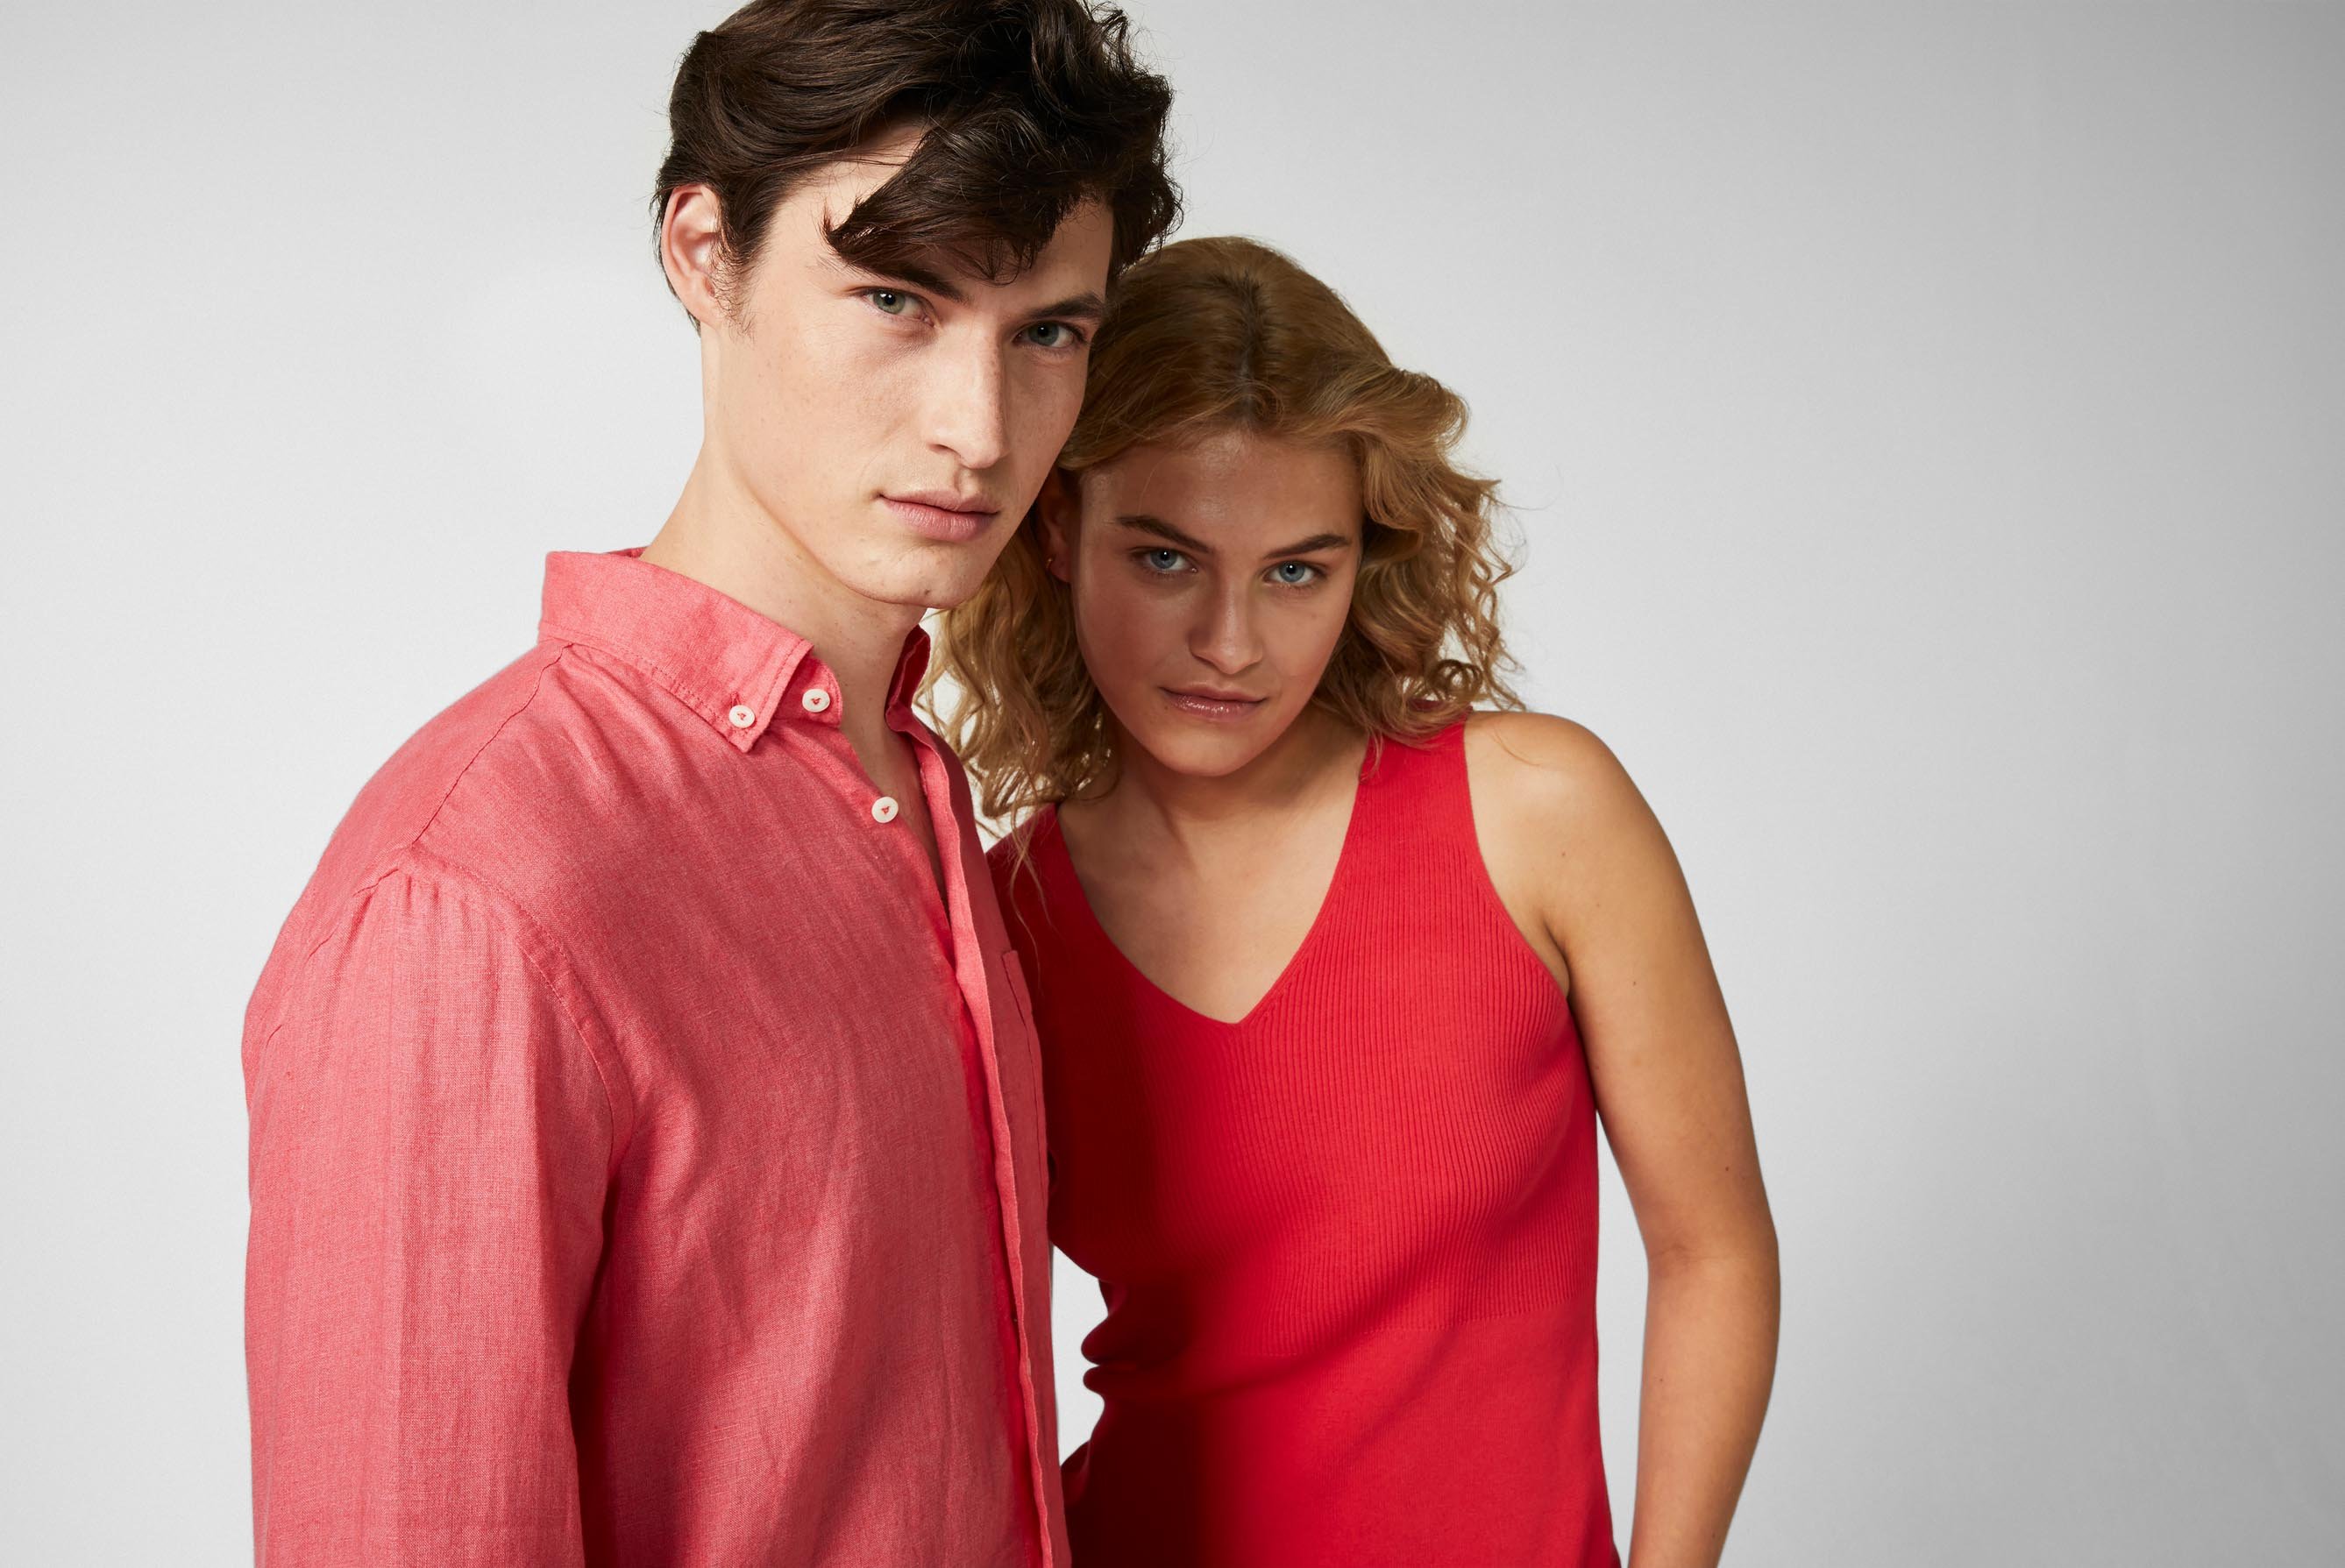 Tops & T-Shirts+Slim fit cotton tank top rot/rose+09.9966..S00192.540.XL